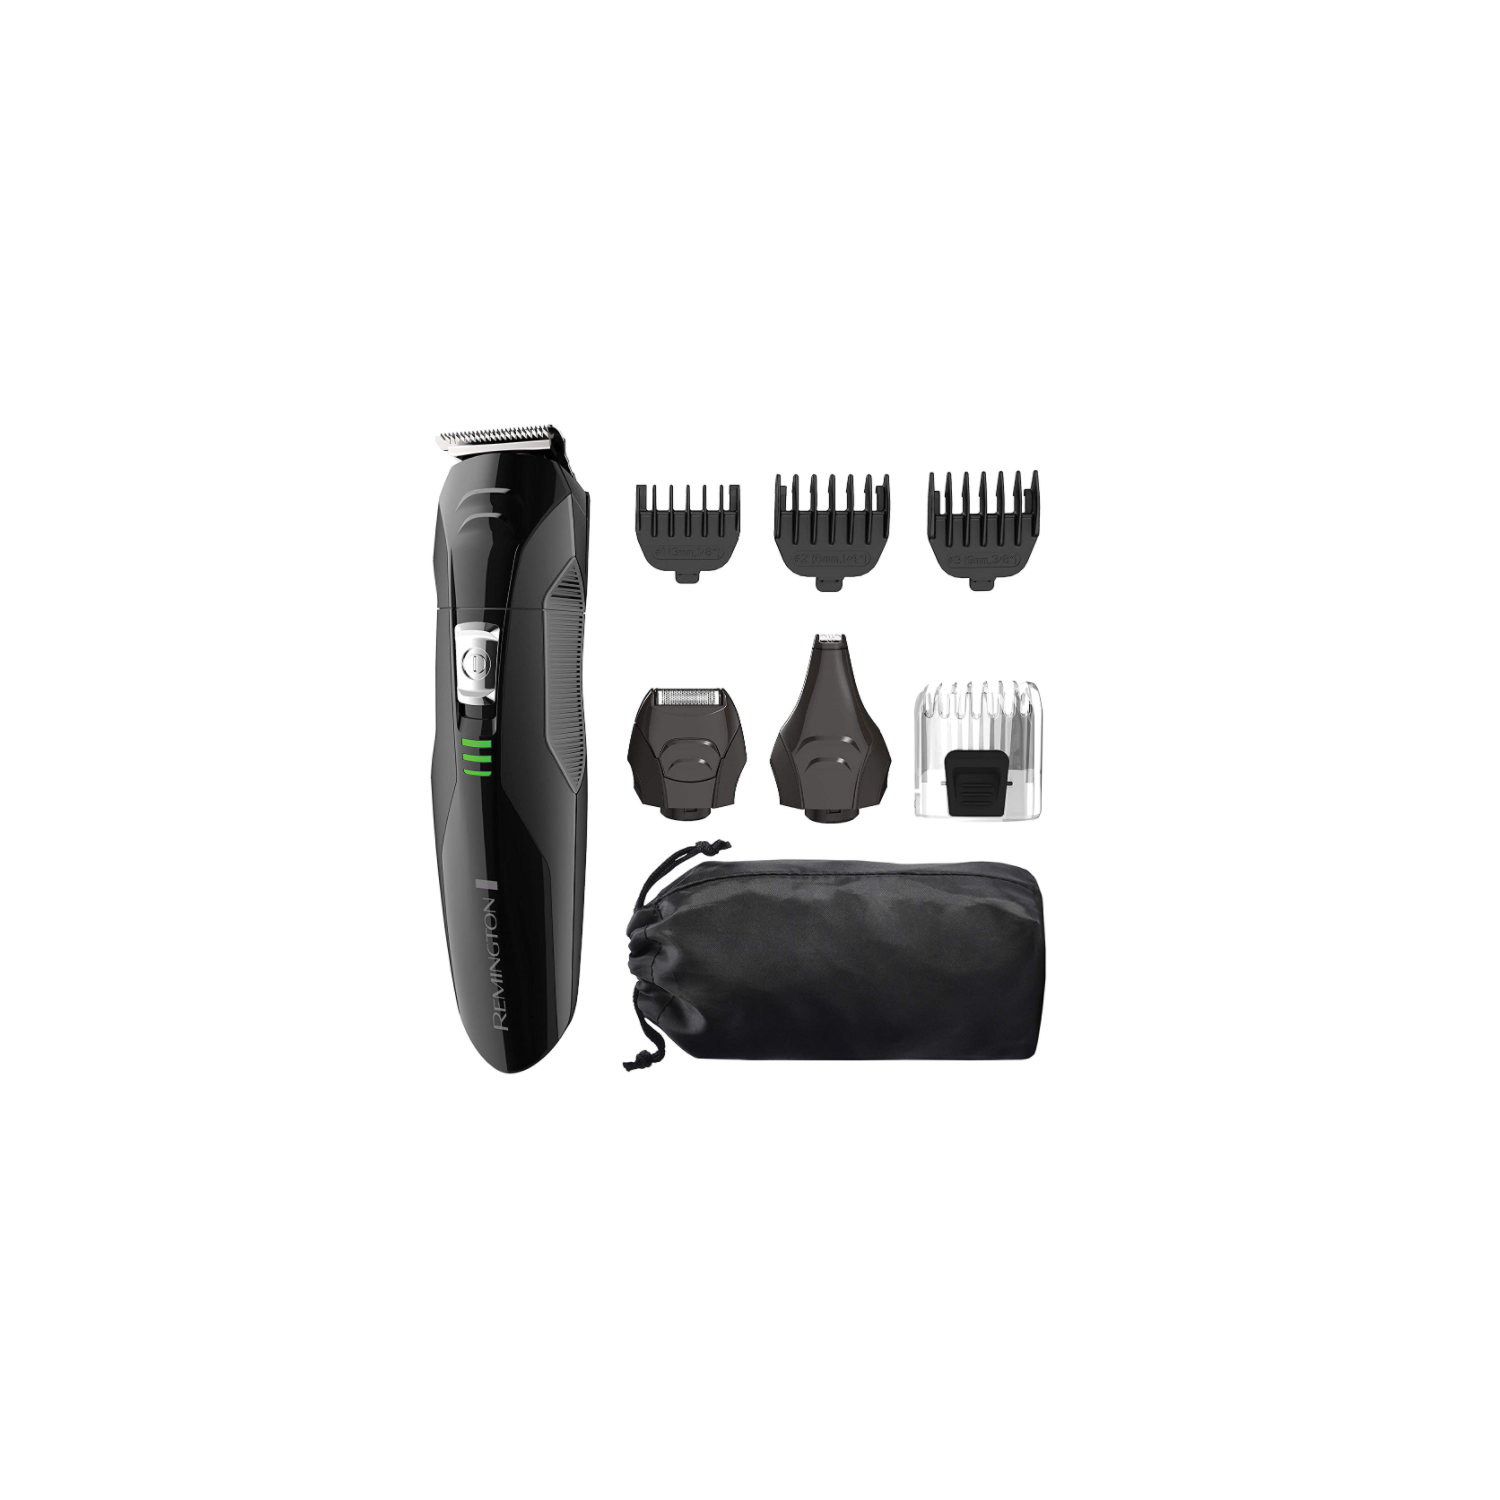 Remington All-in-One Grooming Kit, Lithium Powered, 8 Piece Set with Trimmer, Men's Shaver, Clippers, Beard and Stubble Combs, PG6027